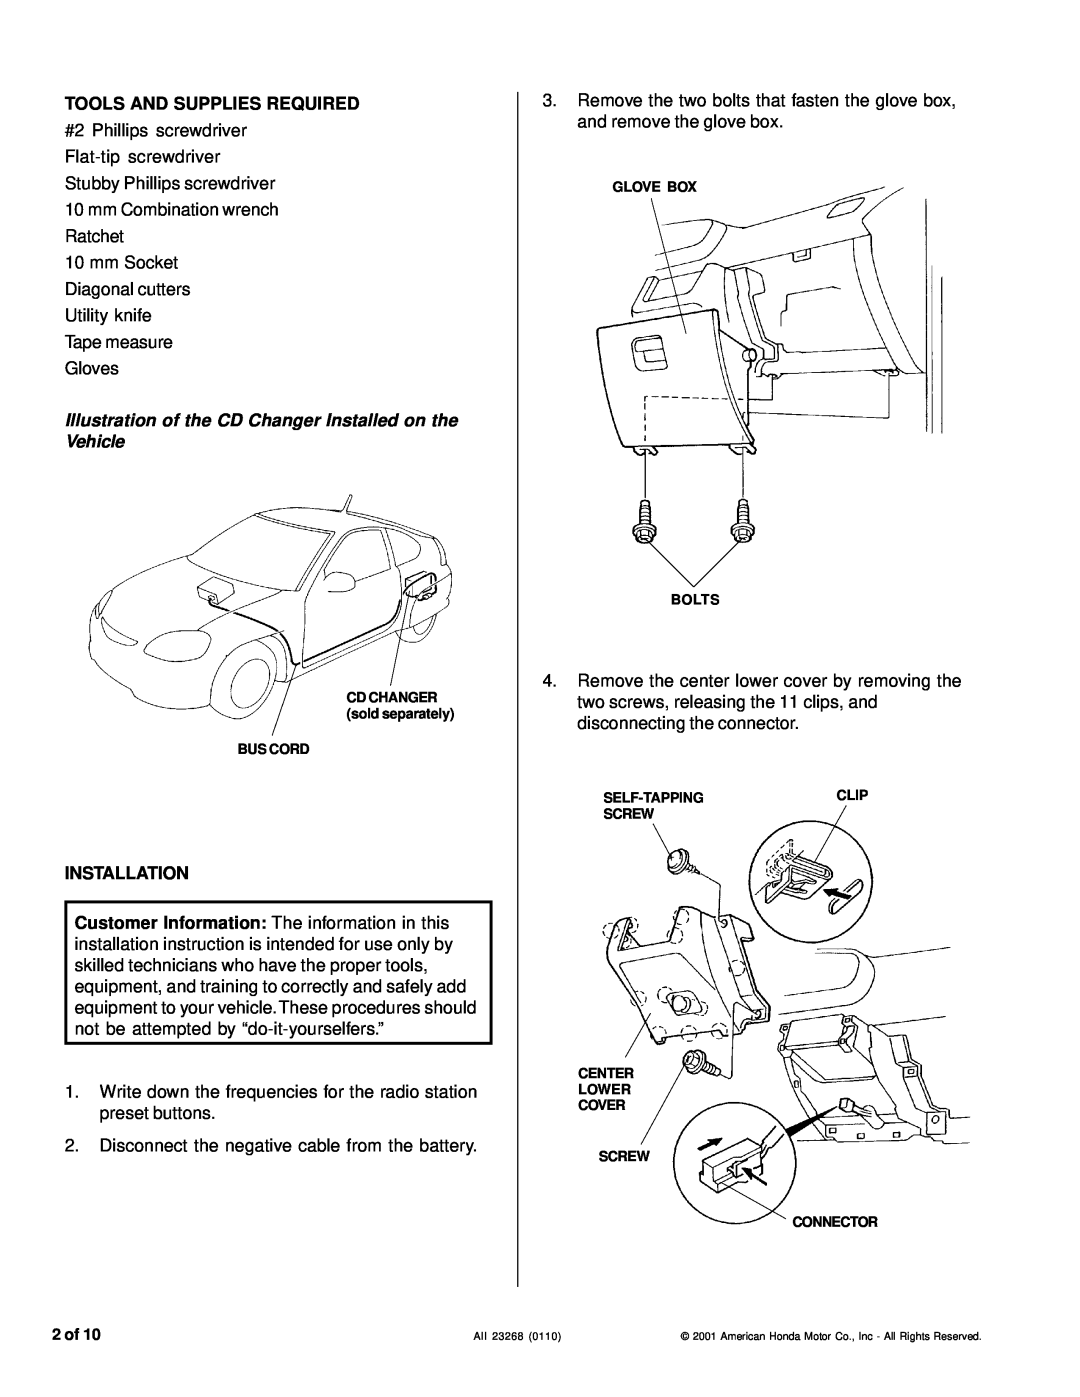 Honda Power Equipment CD Changer installation instructions Tools And Supplies Required, Installation 